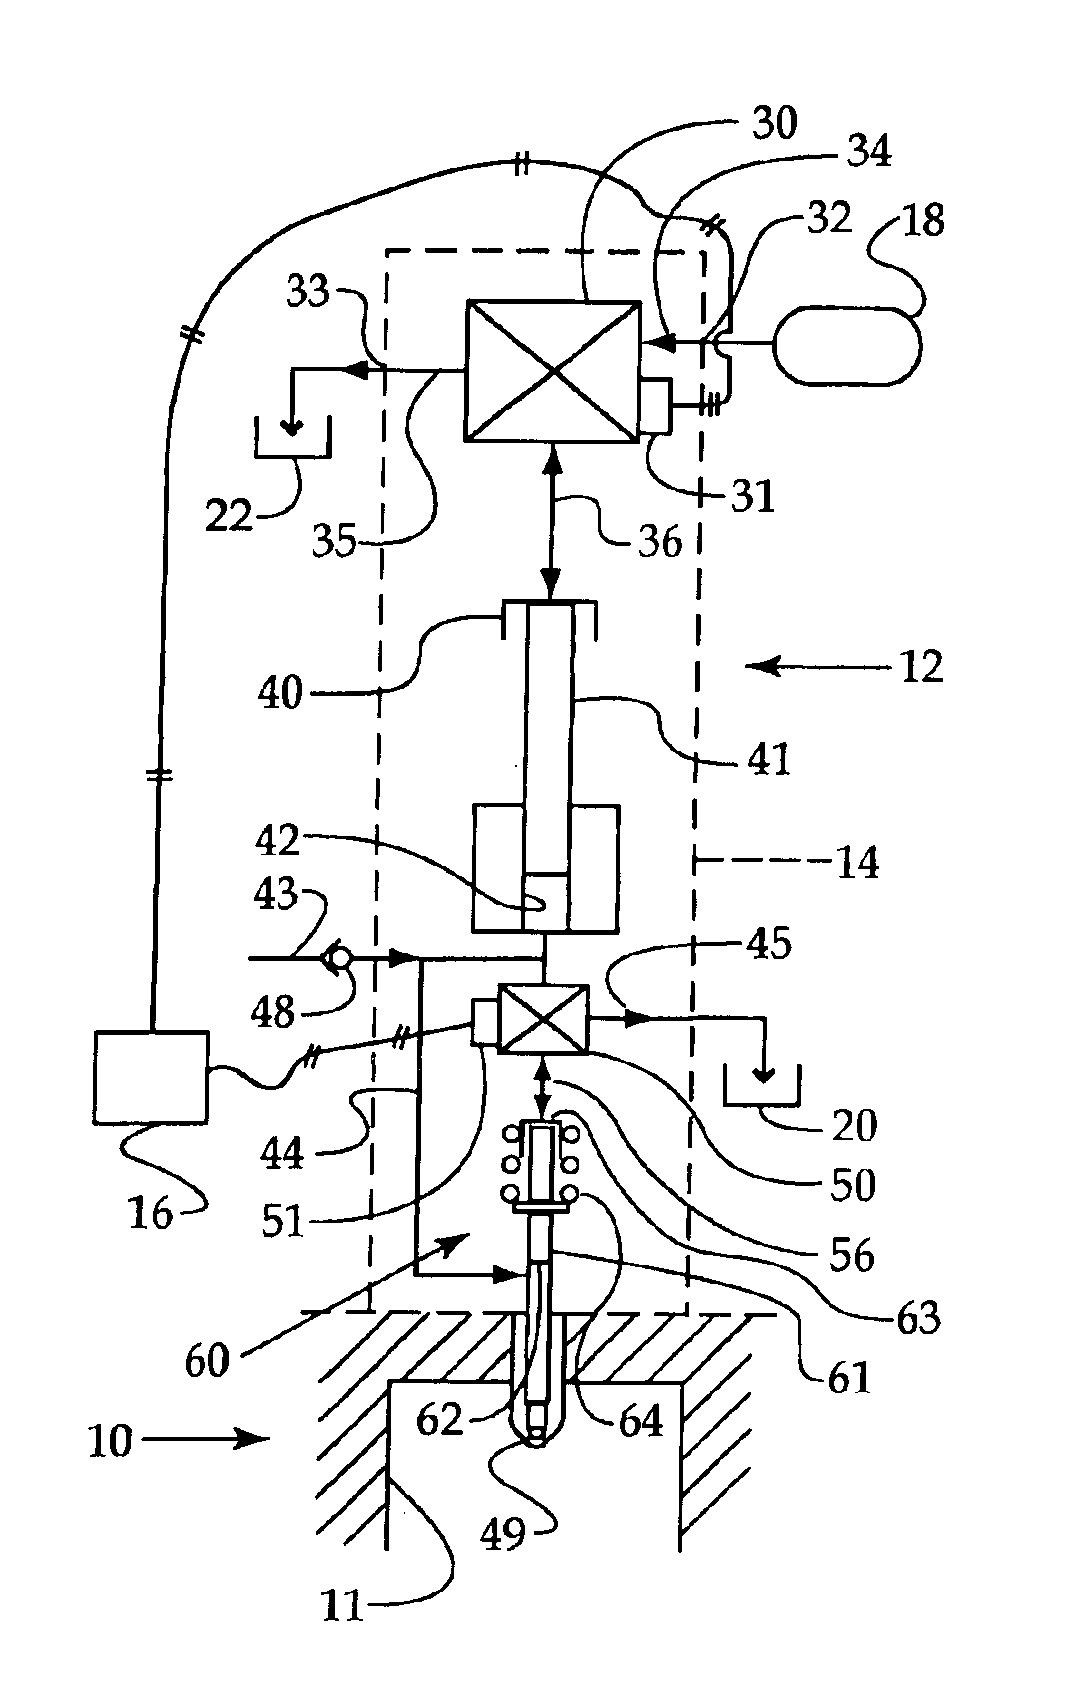 Directly controlled fuel injector with pilot plus main injection sequence capability